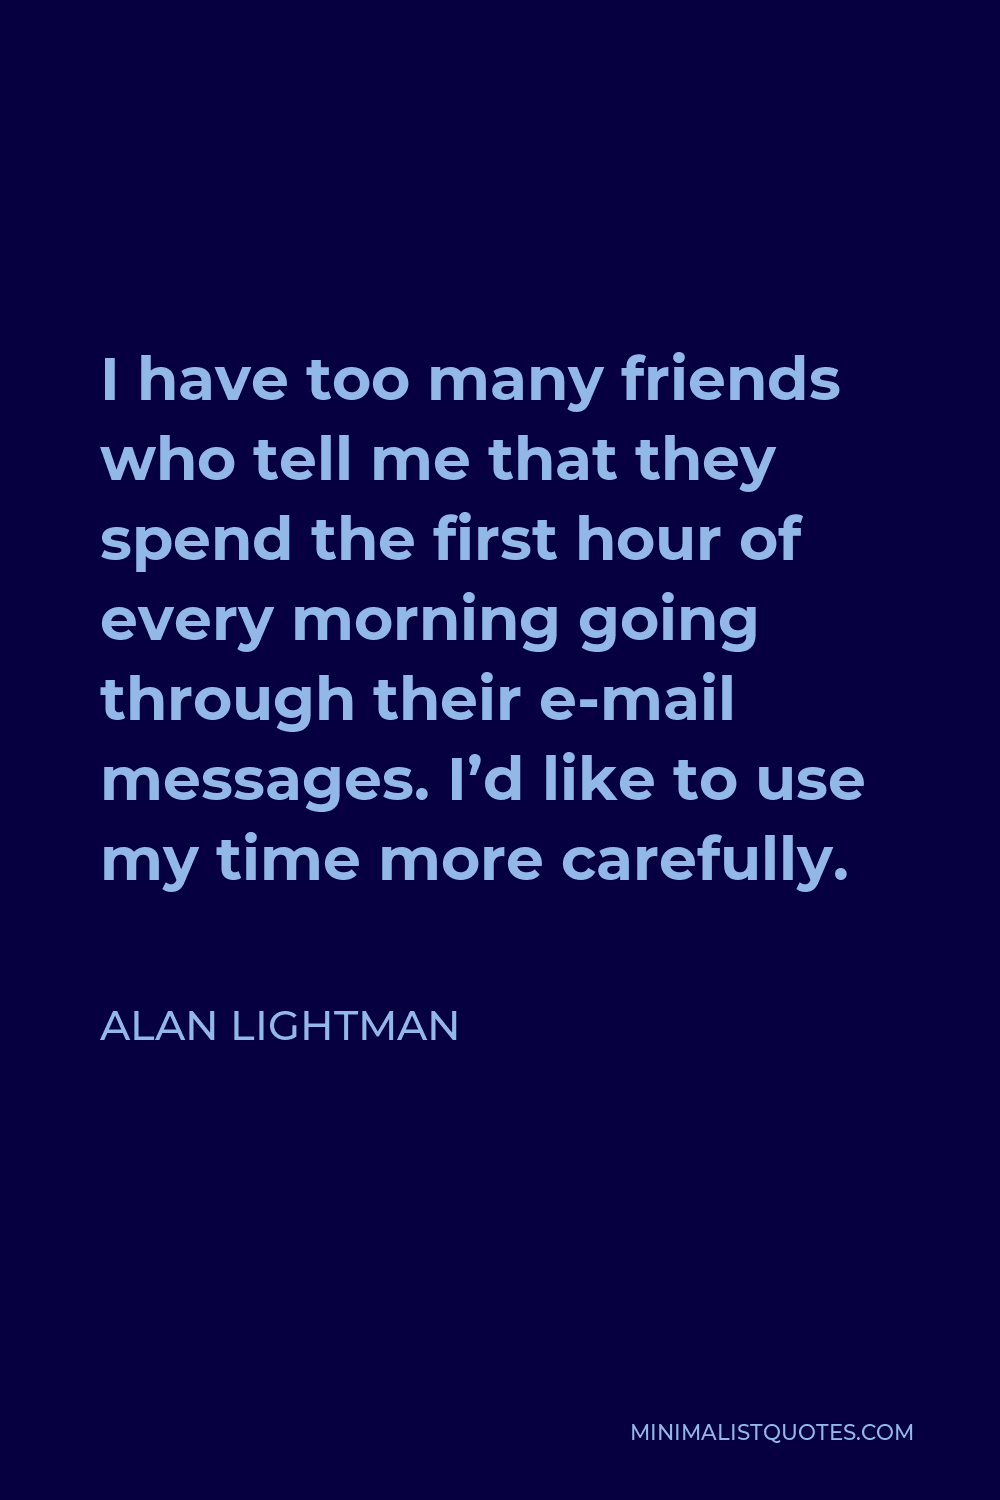 Alan Lightman Quote - I have too many friends who tell me that they spend the first hour of every morning going through their e-mail messages. I’d like to use my time more carefully.